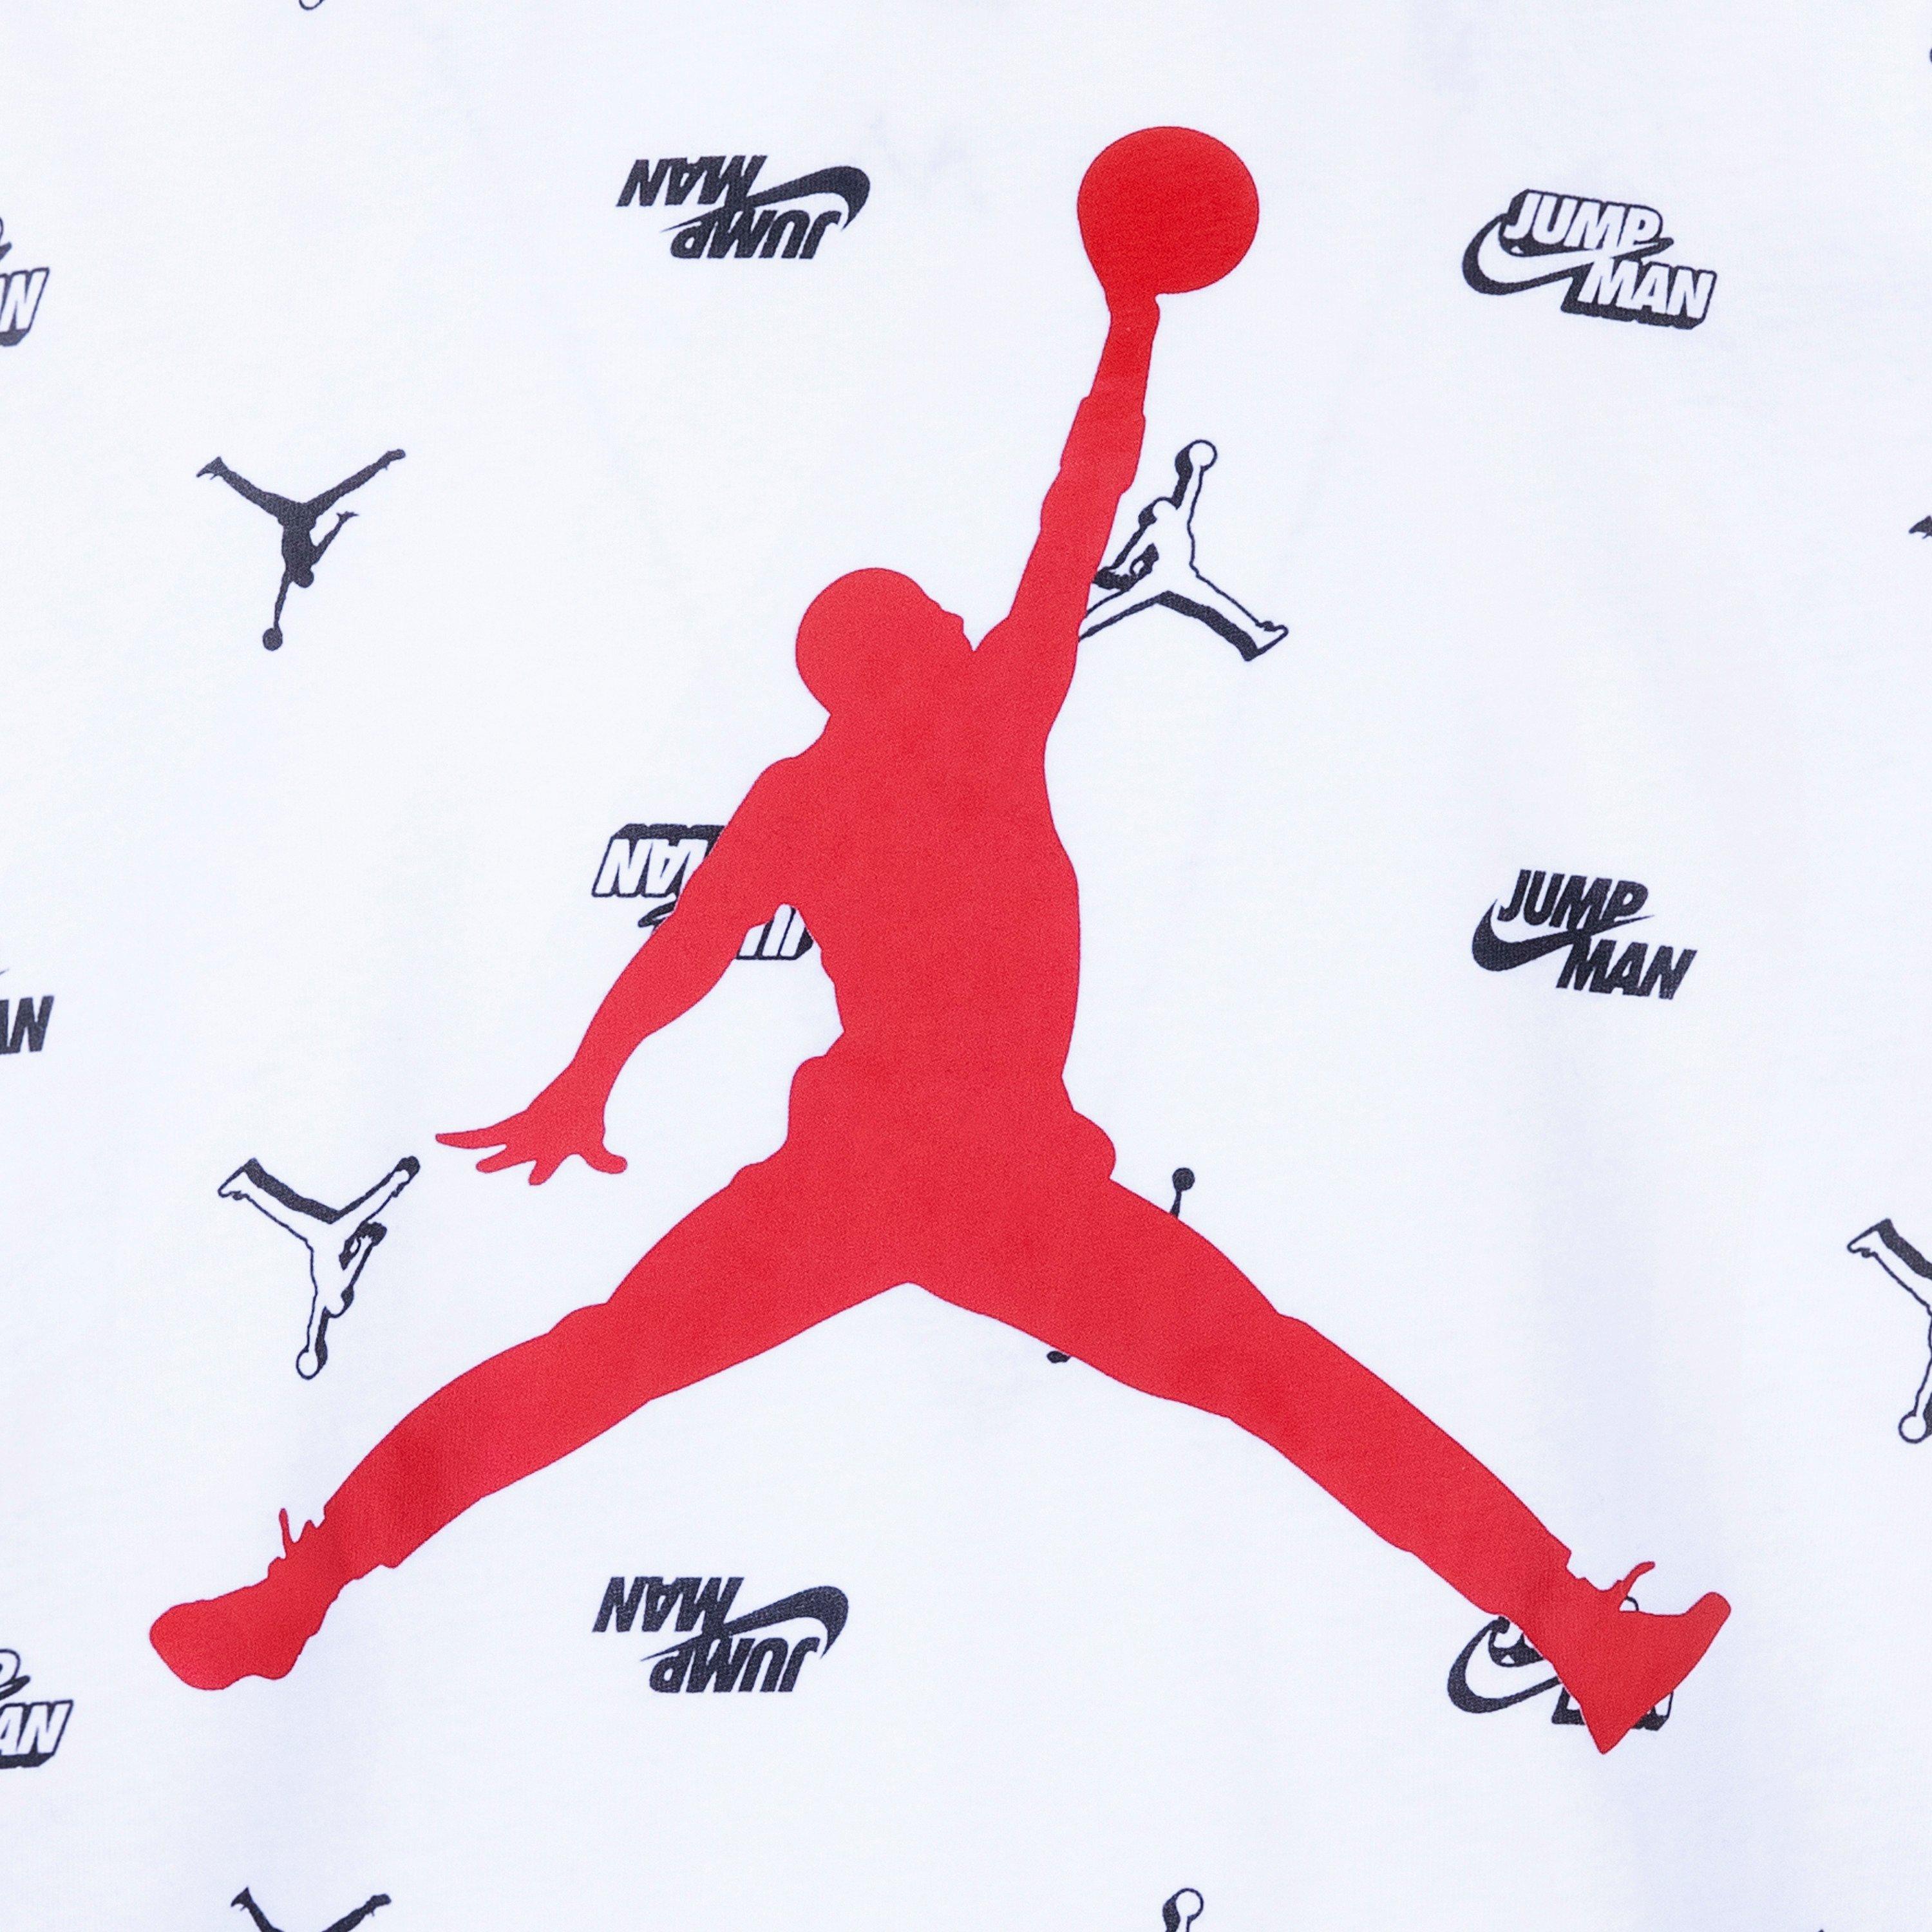 Louis Jumps Over the Jumpman On This Custom